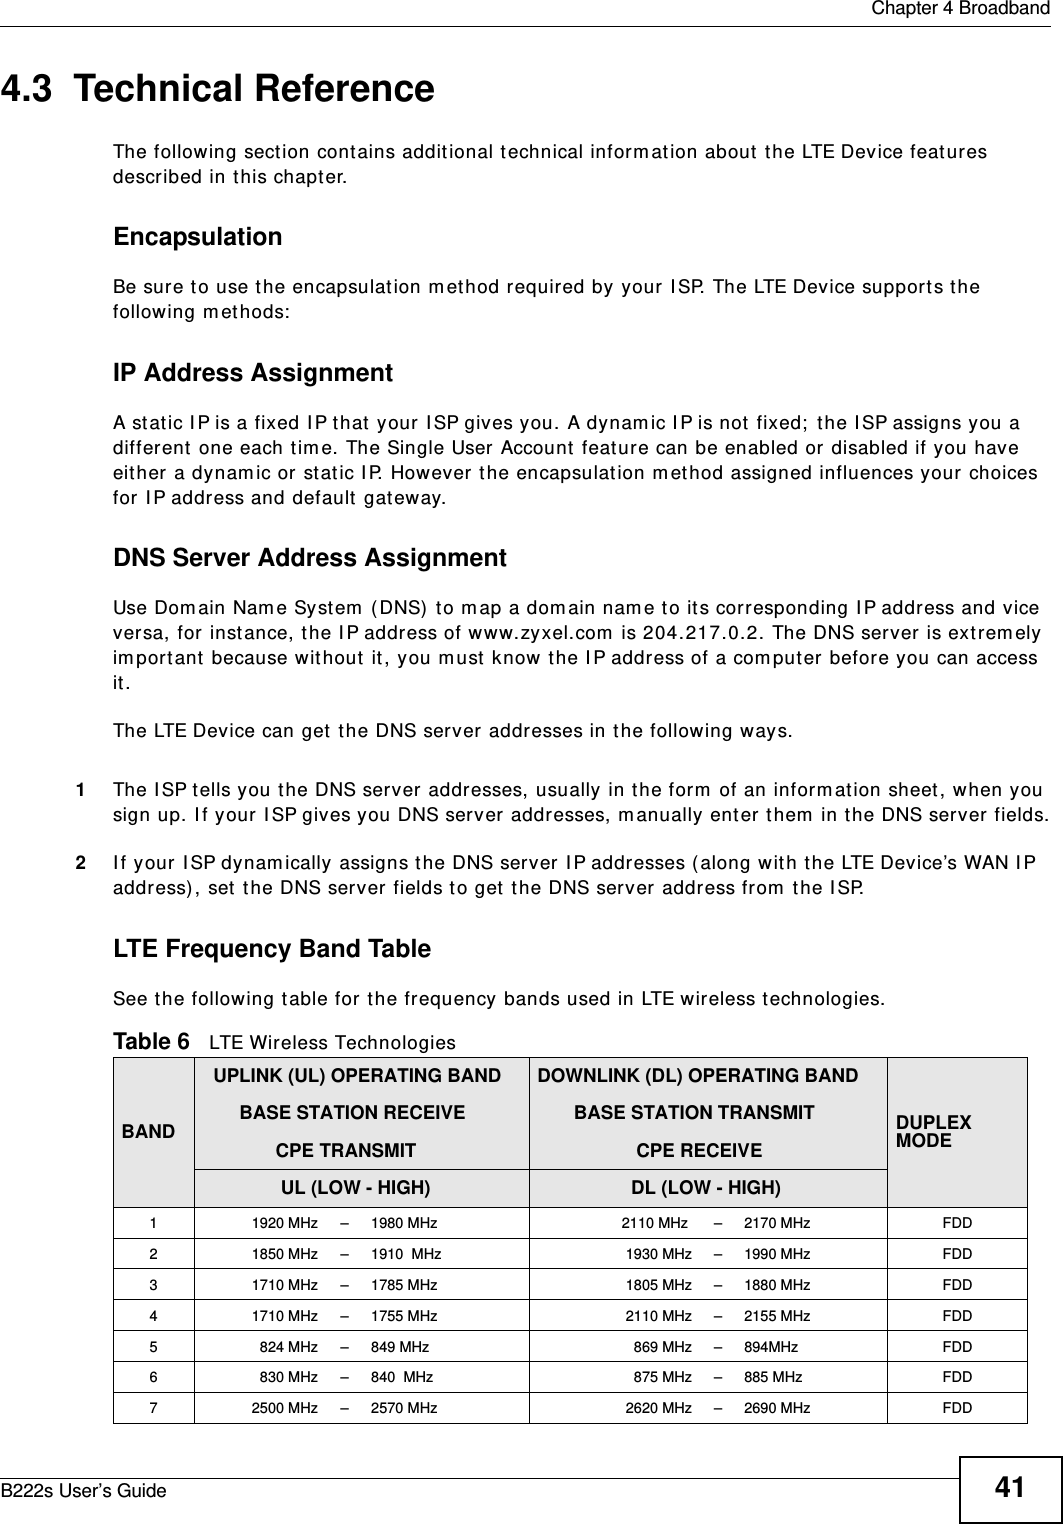  Chapter 4 BroadbandB222s User’s Guide 414.3  Technical ReferenceThe following section cont ains additional technical inform ation about  t he LTE Device feat ures described in this chapt er.EncapsulationBe sure t o use t he encapsulation m et hod required by your I SP. The LTE Device support s t he following m et hods:IP Address AssignmentA static I P is a fixed I P t hat  your I SP gives you. A dynam ic I P is not fixed;  t he I SP assigns you a different  one each t im e. The Single User Account  feature can be enabled or disabled if you have eit her a dynam ic or stat ic I P. However the encapsulation m et hod assigned influences your choices for I P address and default  gateway.DNS Server Address AssignmentUse Dom ain Nam e System  ( DNS)  t o m ap a dom ain nam e to it s corresponding I P address and vice versa, for instance, t he I P address of ww w.zyxel.com  is 204.217.0.2. The DNS server is ext rem ely im port ant  because wit hout  it, you m ust  know  t he I P address of a com puter before you can access it . The LTE Device can get  t he DNS server addresses in the follow ing ways.1The I SP tells you t he DNS server addresses, usually in t he form  of an inform ation sheet, when you sign up. I f your I SP gives you DNS server addresses, m anually enter t hem  in the DNS server fields.2I f your I SP dynam ically assigns t he DNS server I P addresses ( along wit h t he LTE Device’s WAN I P address) , set  t he DNS server fields t o get  t he DNS ser ver addr ess from  t he I SP.LTE Frequency Band TableSee t he following table for t he frequency bands used in LTE wireless t echnologies.Table 6   LTE Wireless TechnologiesBAND  UPLINK (UL) OPERATING BAND       BASE STATION RECEIVE              CPE TRANSMITDOWNLINK (DL) OPERATING BAND       BASE STATION TRANSMIT                   CPE RECEIVEDUPLEX MODE               UL (LOW - HIGH)                   DL (LOW - HIGH)1 1920 MHz – 1980 MHz  2110 MHz  – 2170 MHz FDD2 1850 MHz – 1910  MHz 1930 MHz – 1990 MHz FDD3 1710 MHz – 1785 MHz 1805 MHz – 1880 MHz FDD4 1710 MHz – 1755 MHz 2110 MHz – 2155 MHz FDD5 824 MHz – 849 MHz 869 MHz – 894MHz FDD6 830 MHz – 840  MHz 875 MHz – 885 MHz FDD7 2500 MHz – 2570 MHz 2620 MHz – 2690 MHz FDD